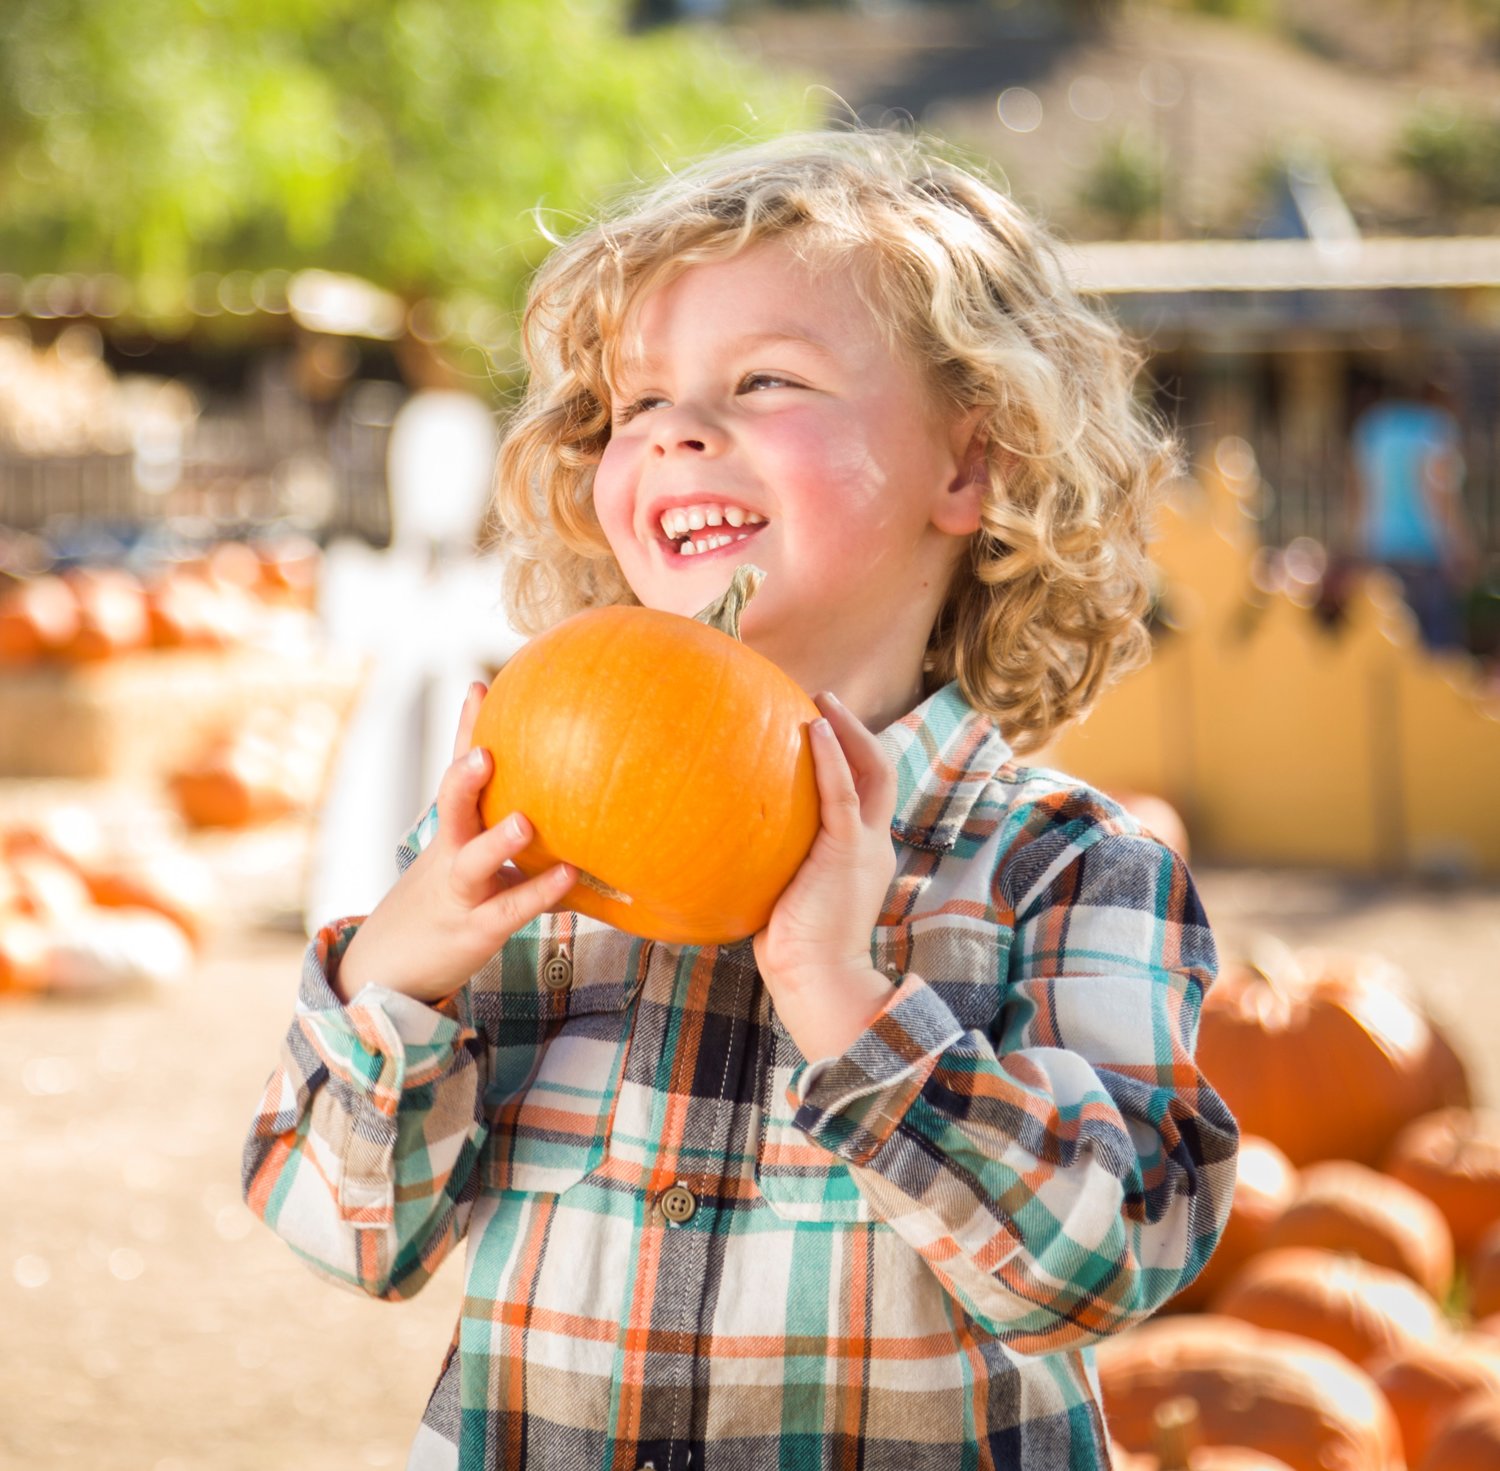 Kickoff the fall season with a visit to the Pumpkin Patch Express in Silverhill. Take a ride to the pumpkin patch on the train.